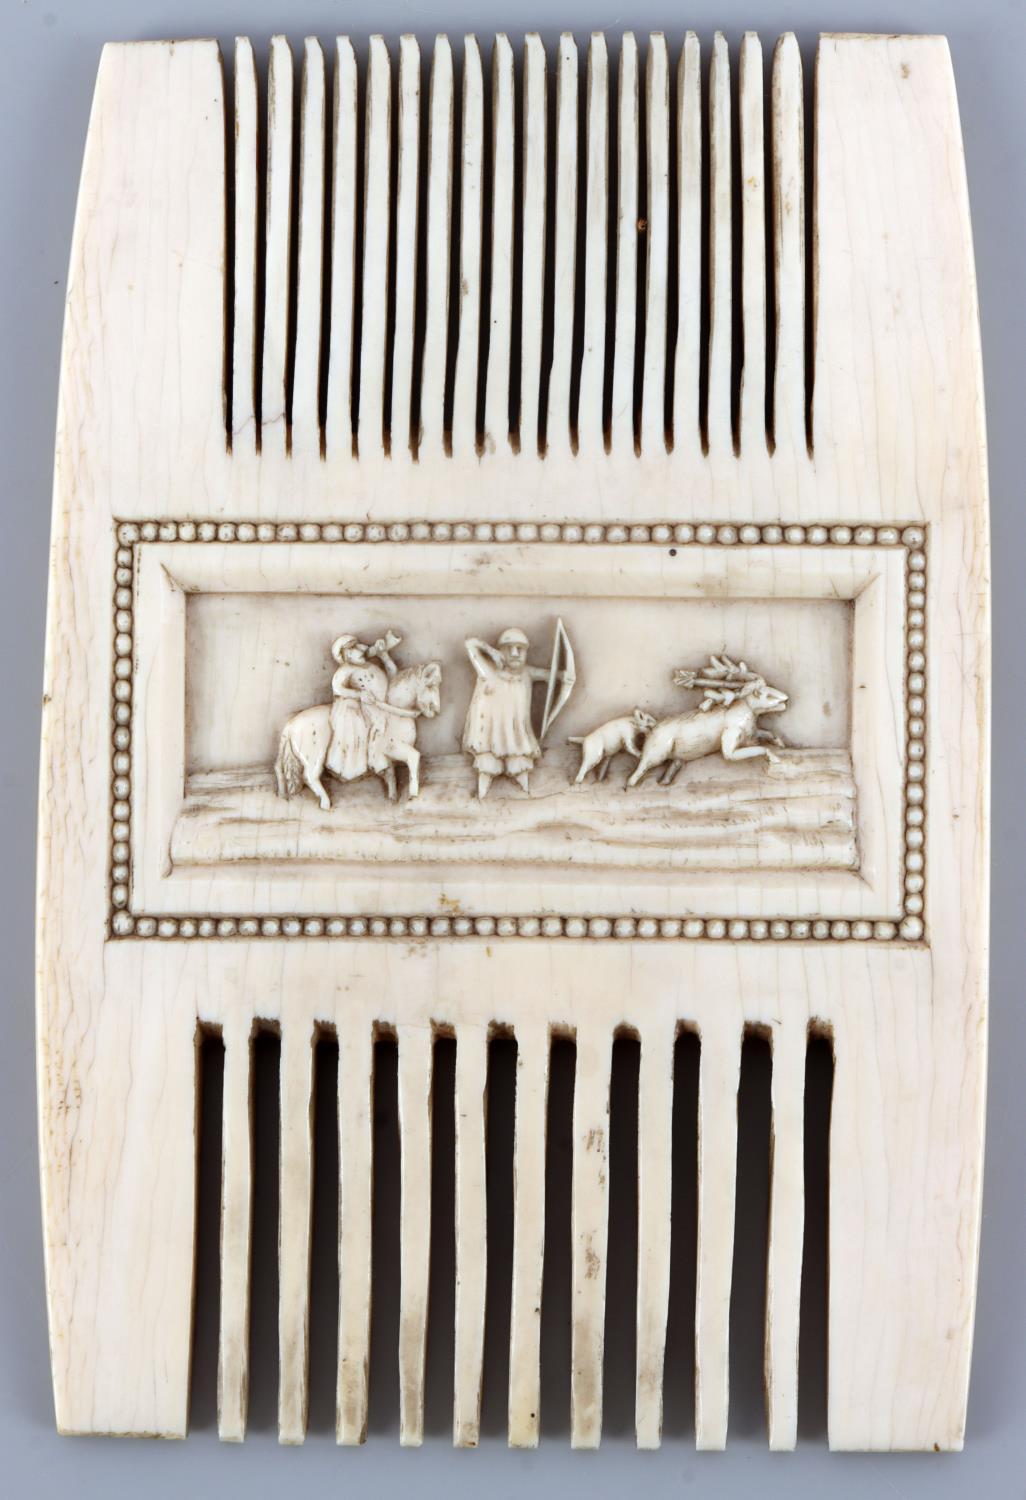 MEDIEVAL IVORY LITURGICAL COMB W/ HUNTING SCENES